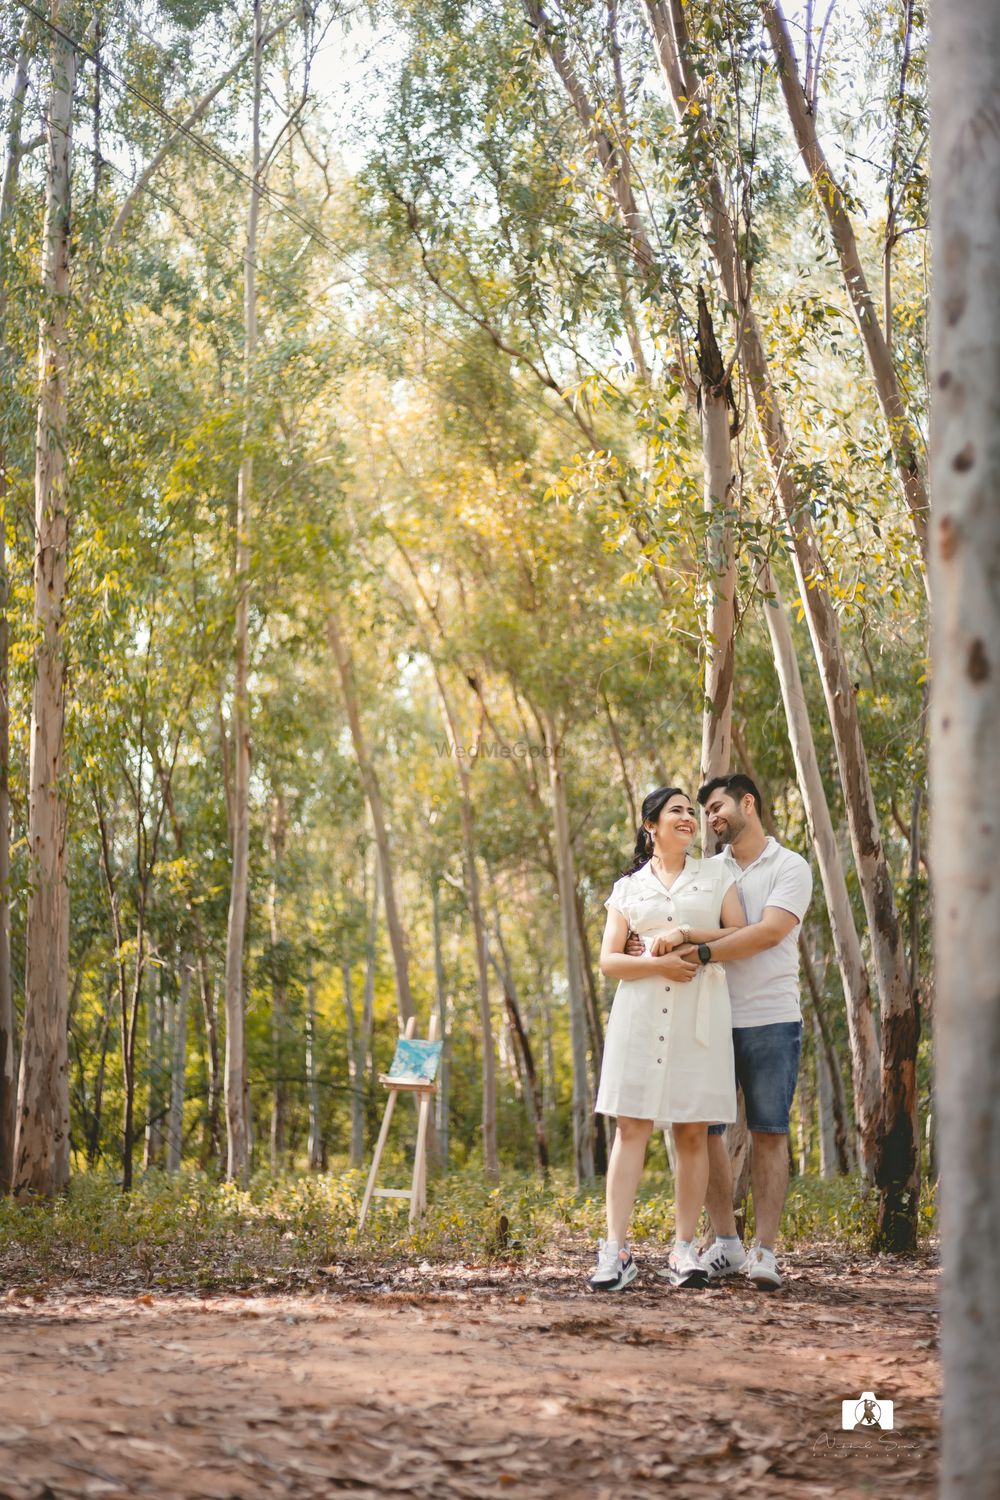 Photo From Pre Wed in the Woods - By Nikhil Soni Photography